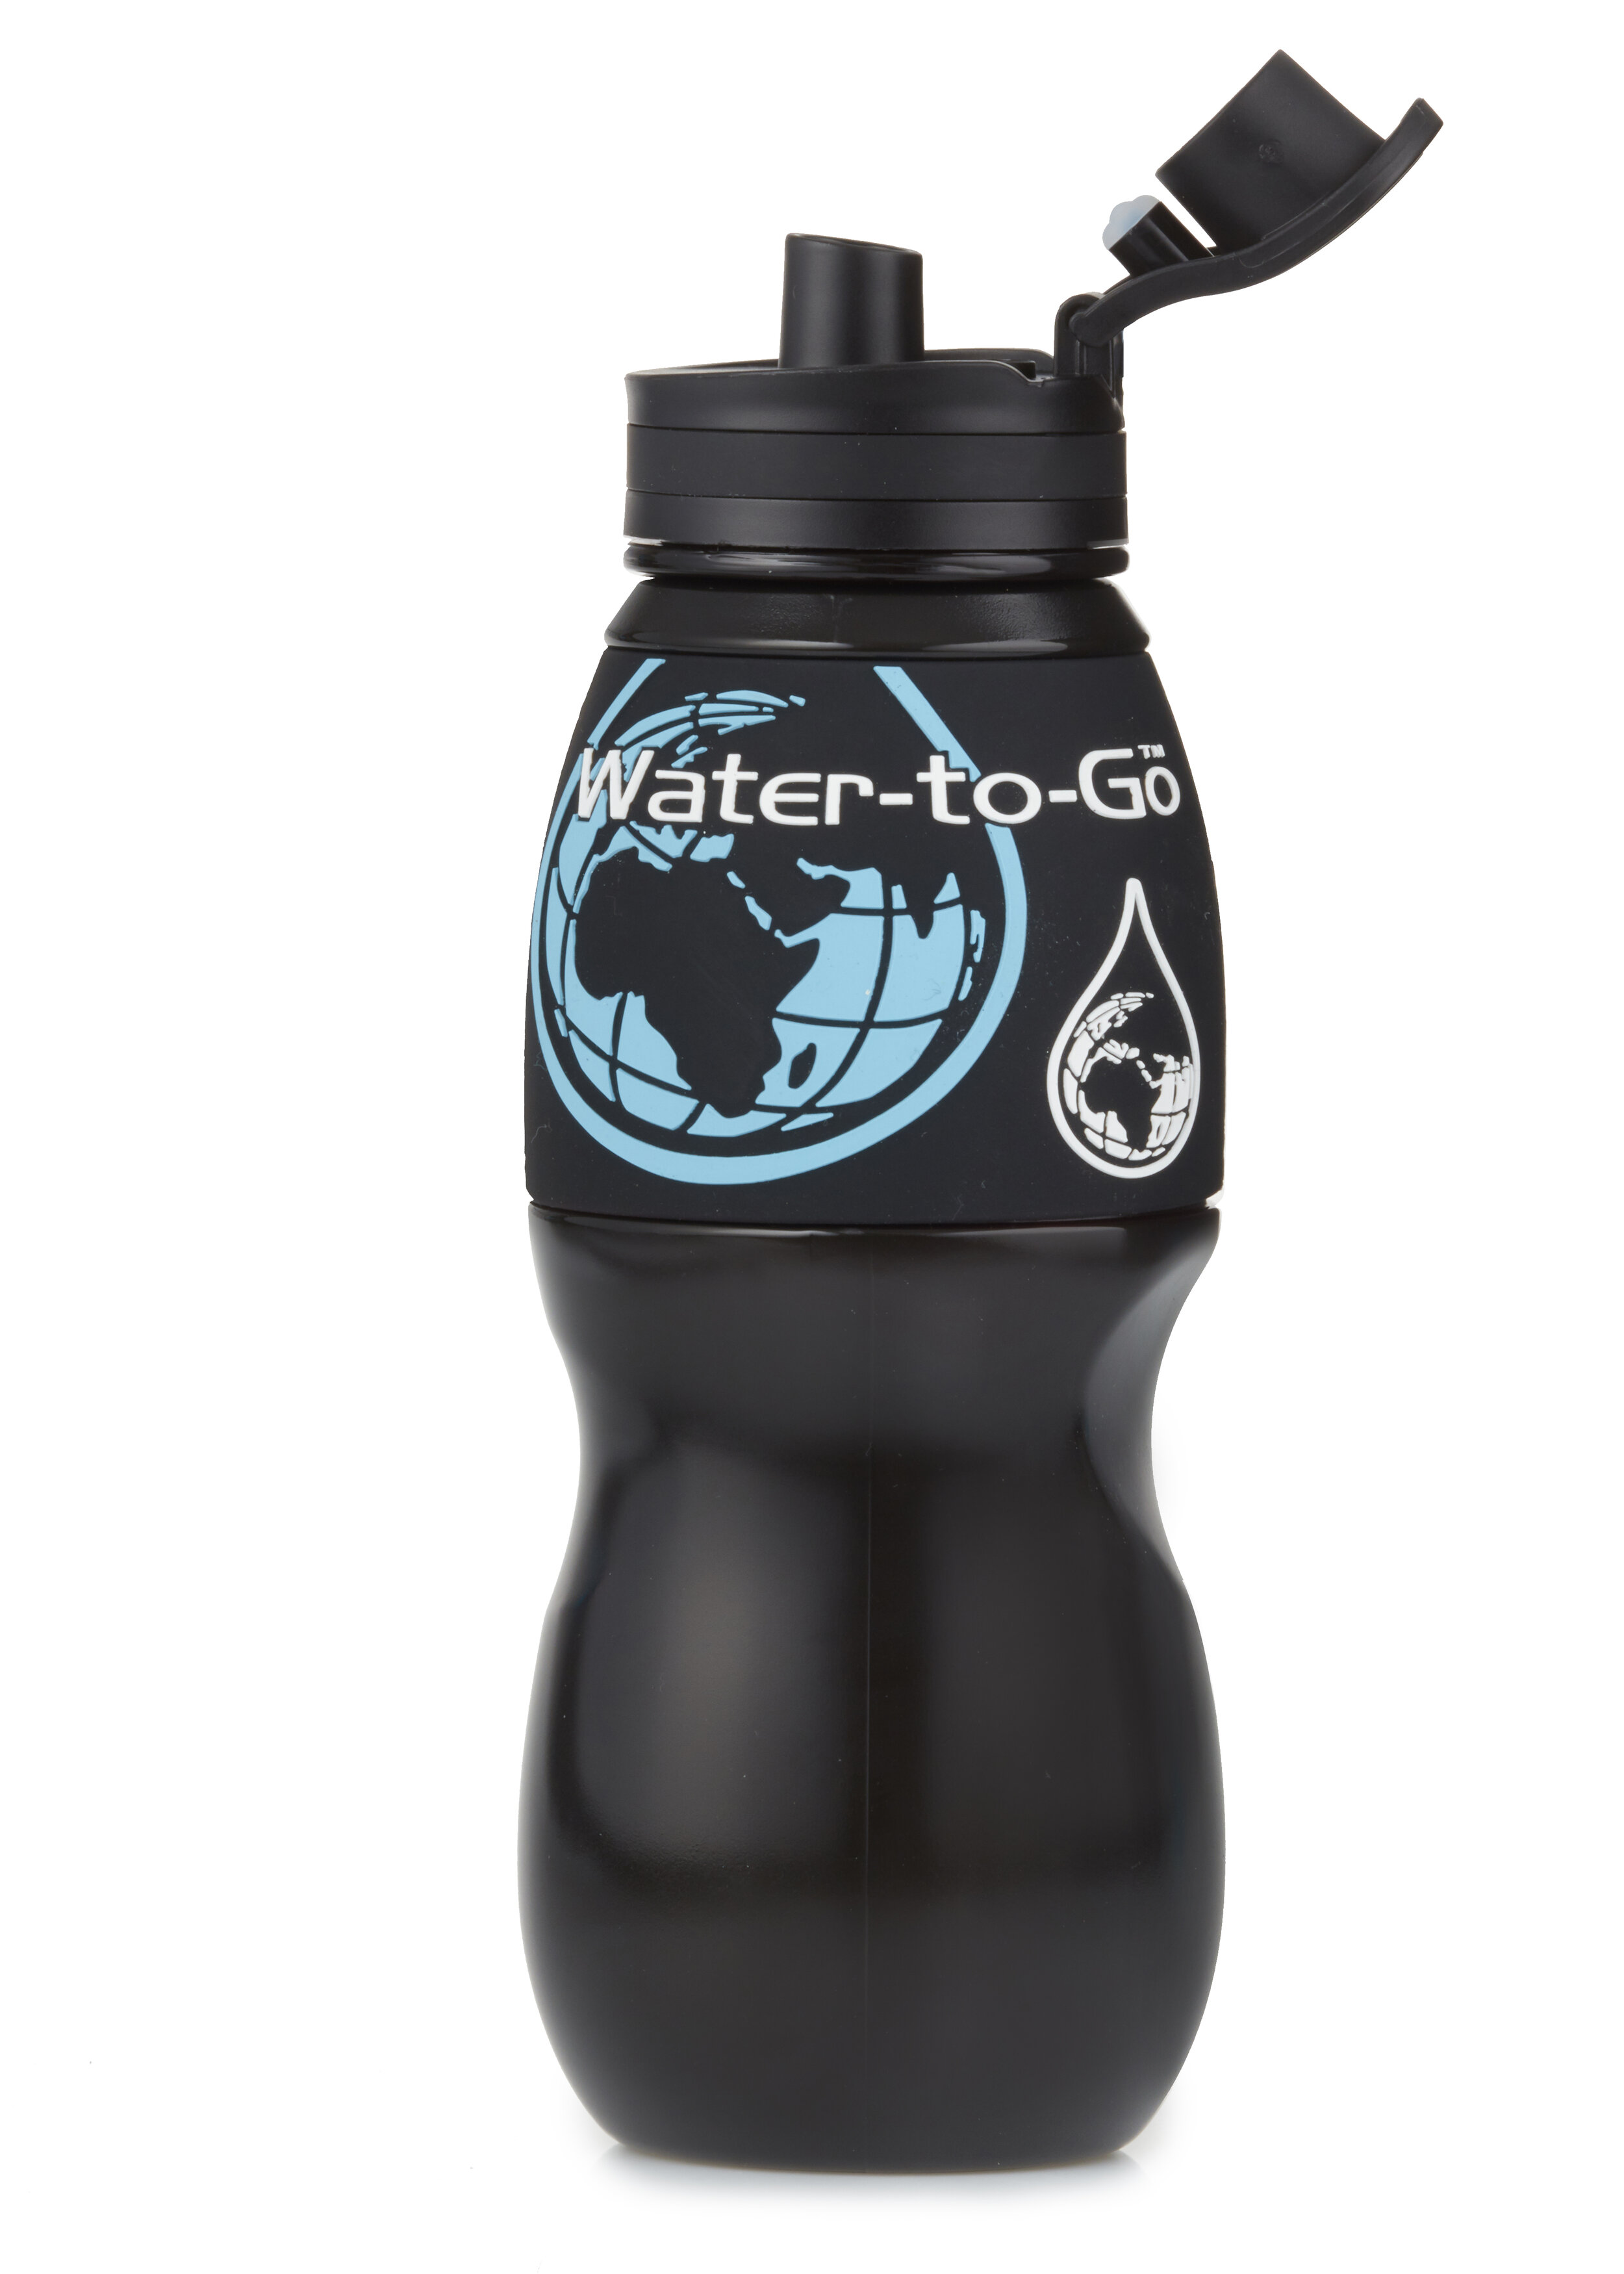 Water to go review